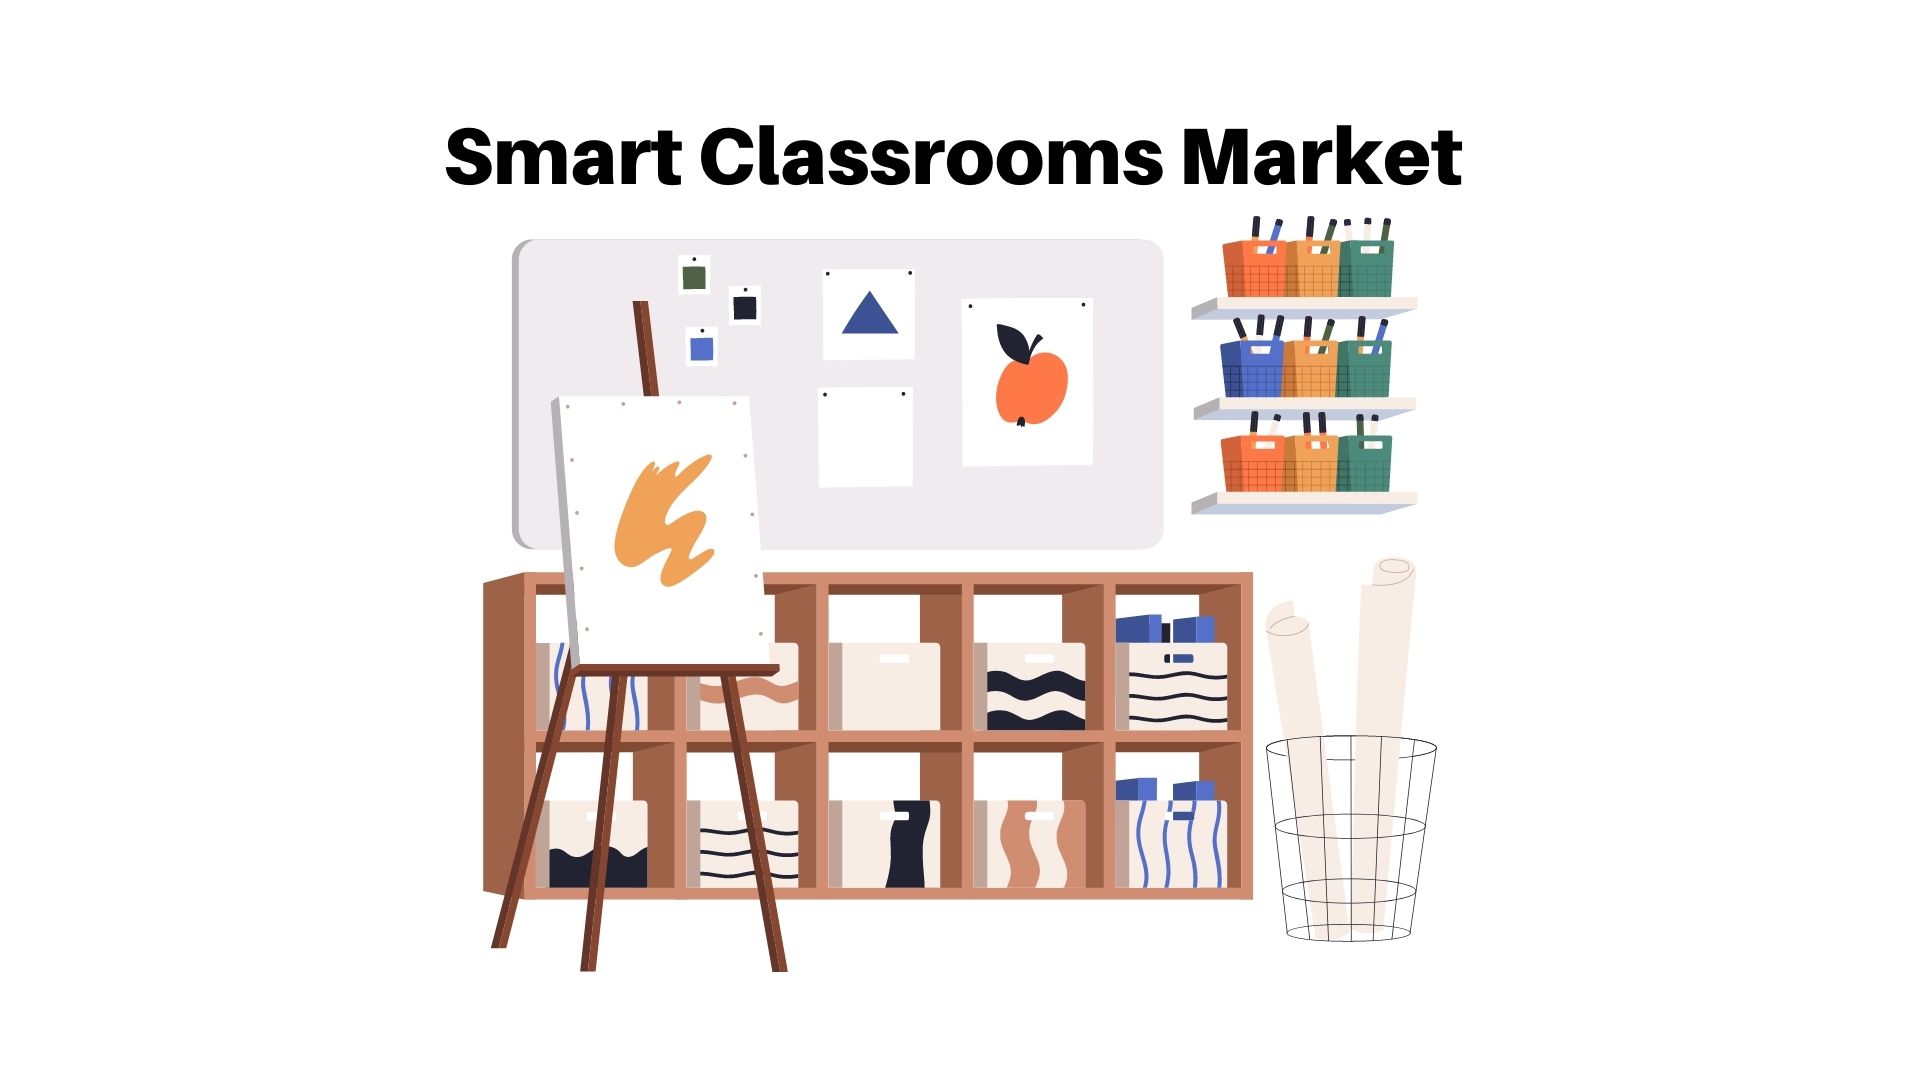 Education Technology (Ed Tech) and Smart Classrooms Market [USD 498 Bn by 2032]